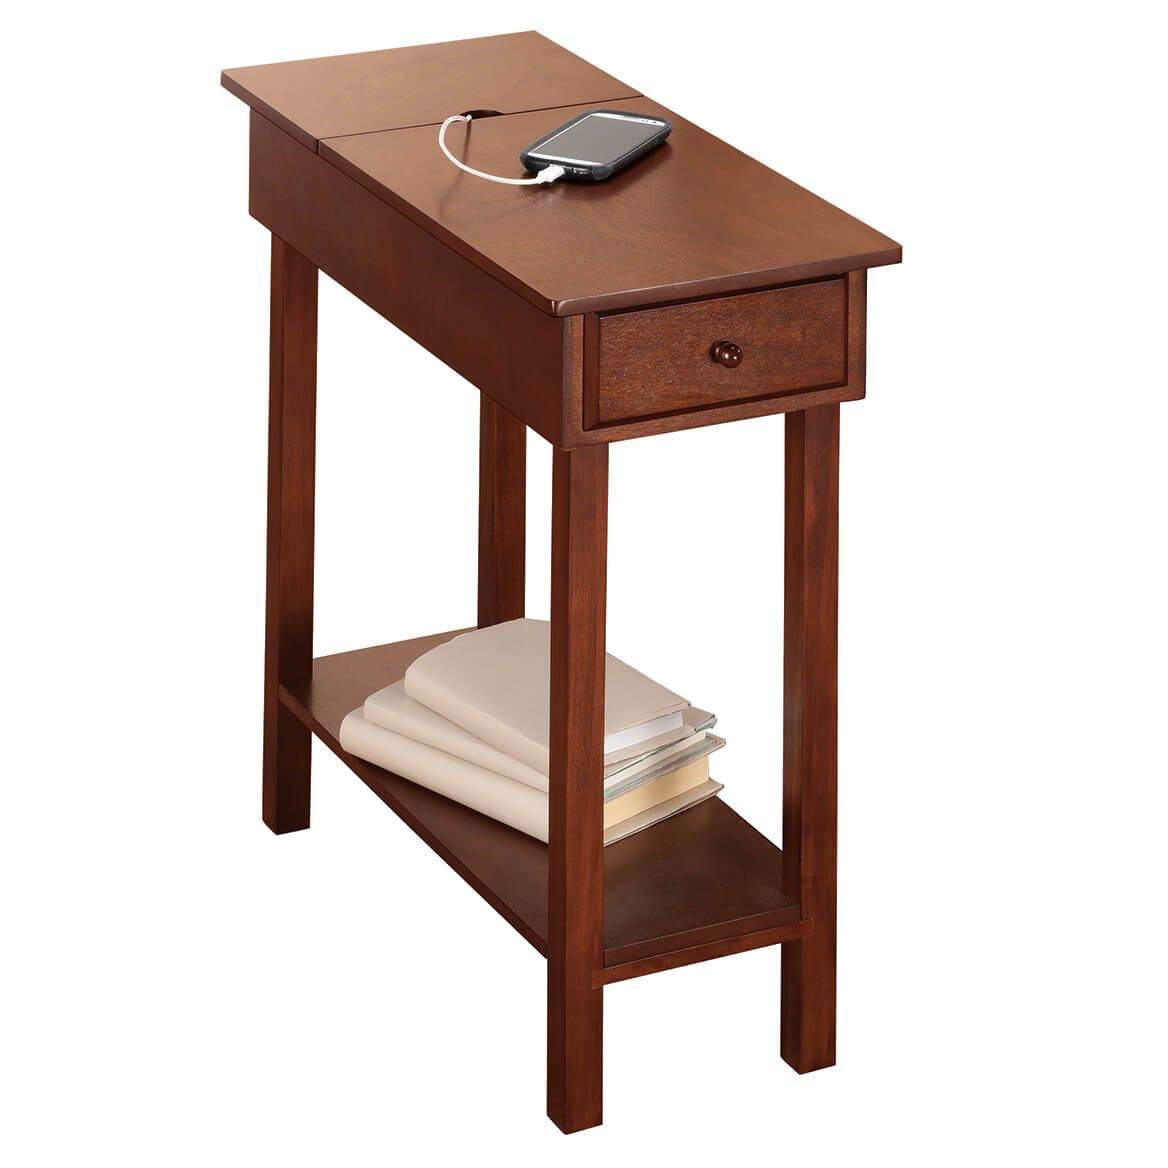 Chairside Table with USB Power Strip by OakRidge™  XL + '-' + 358129